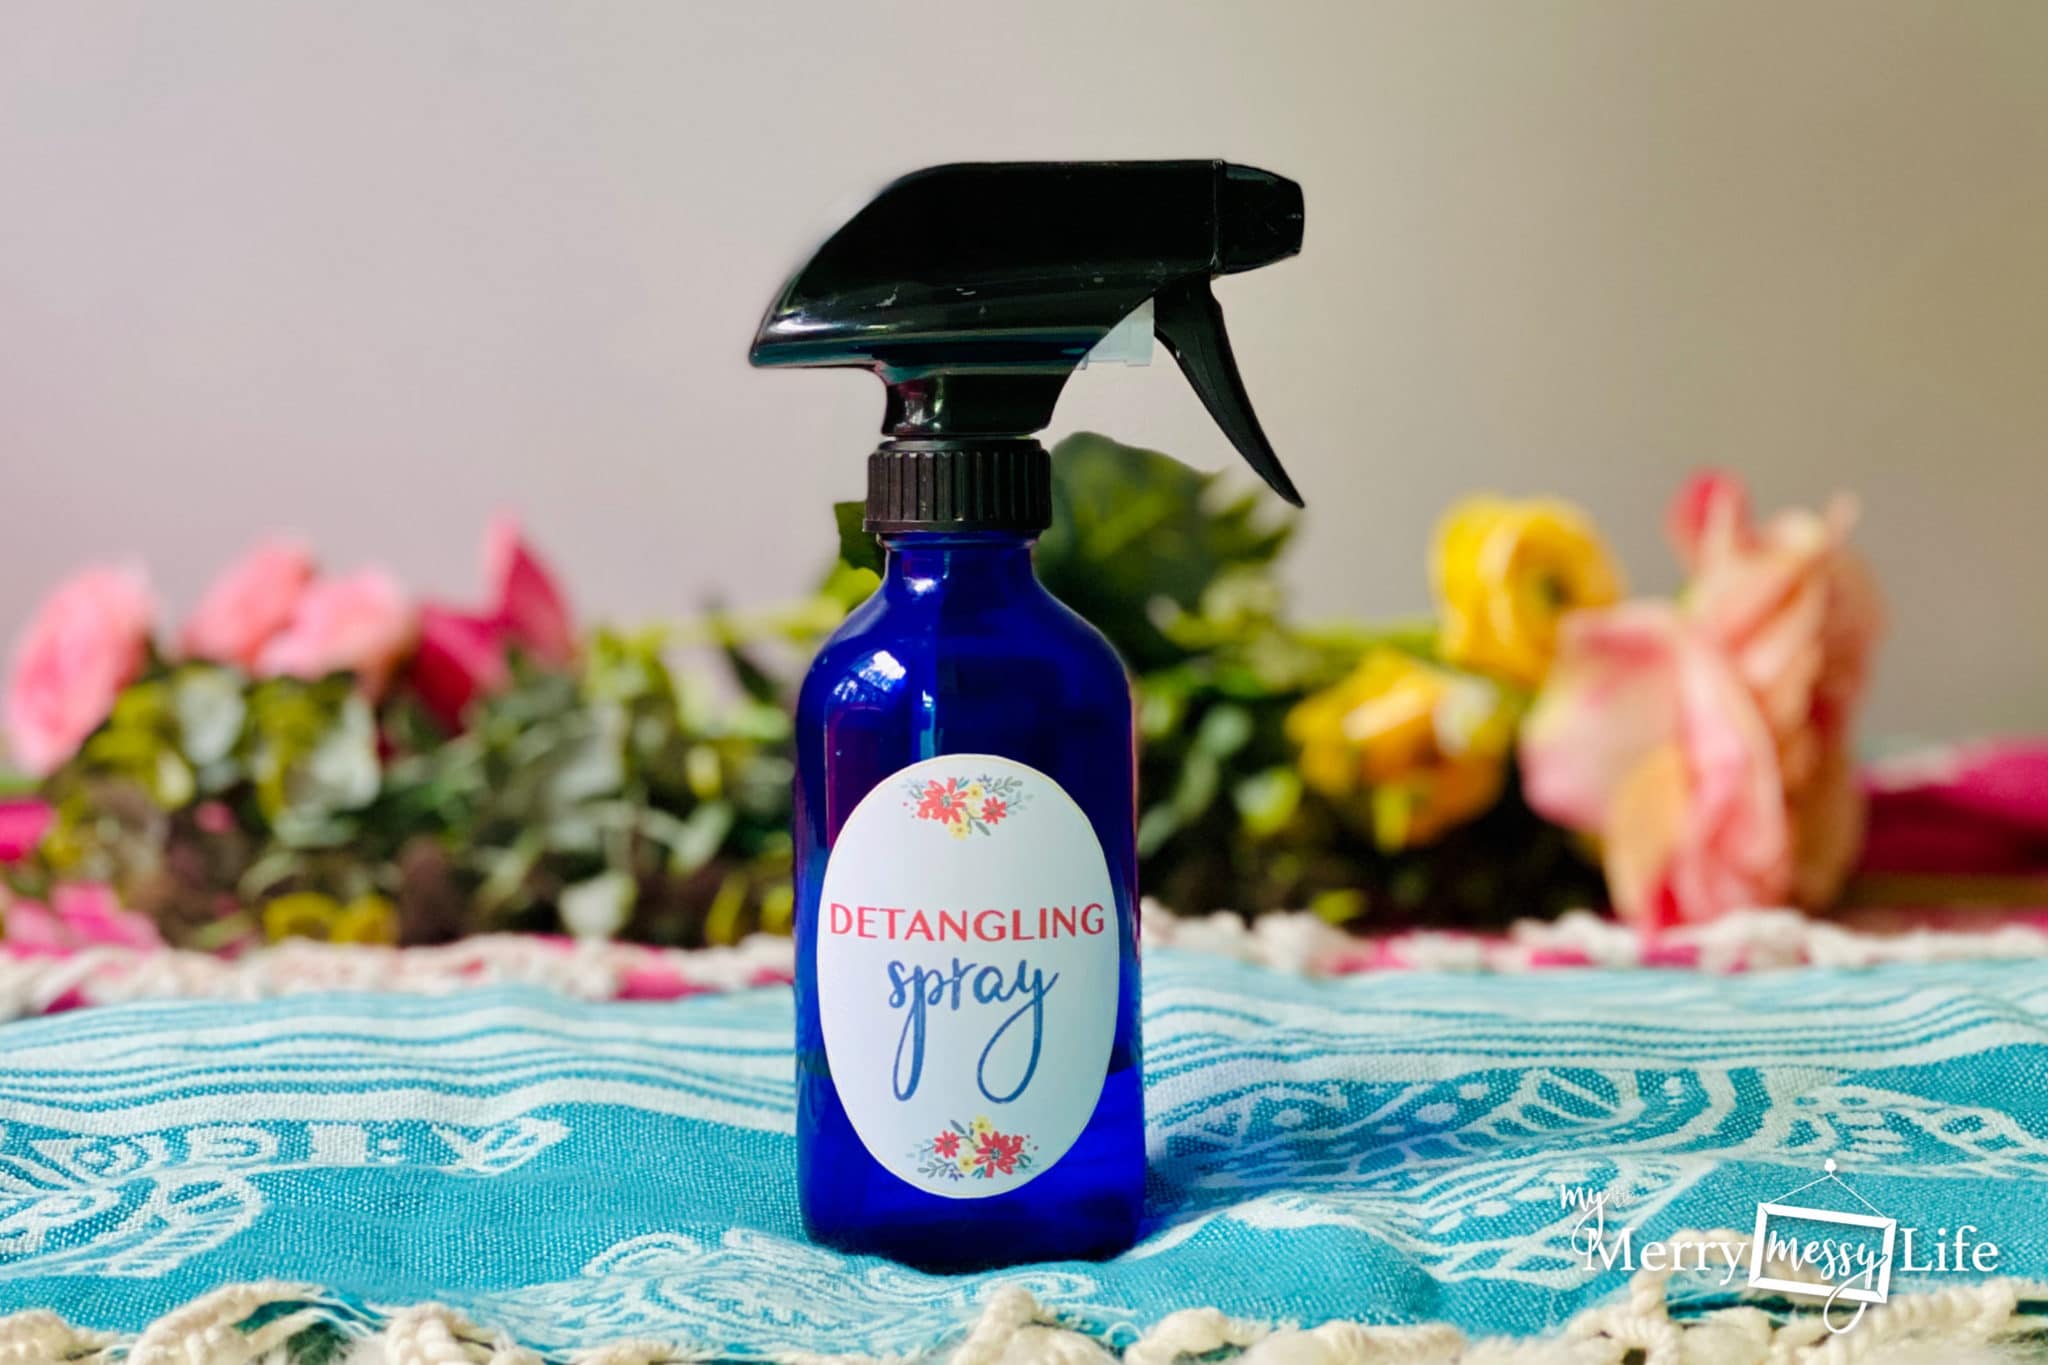 DIY Natural Detangling Spray Recipe using a Natural Conditioner, Essential Oils and Water